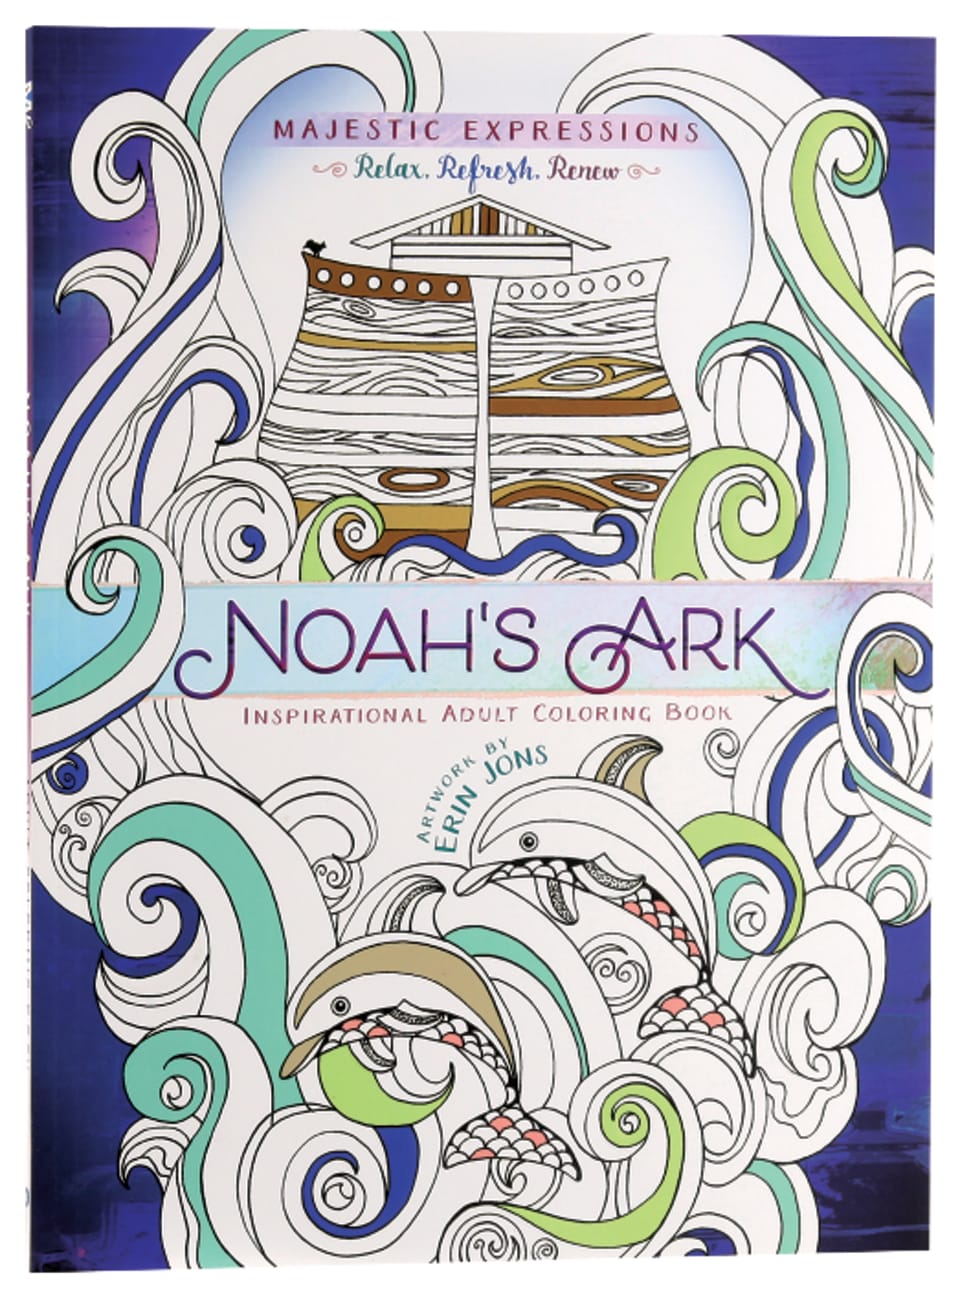 Noah's Ark (Majestic Expressions) (Adult Coloring Books Series) Paperback